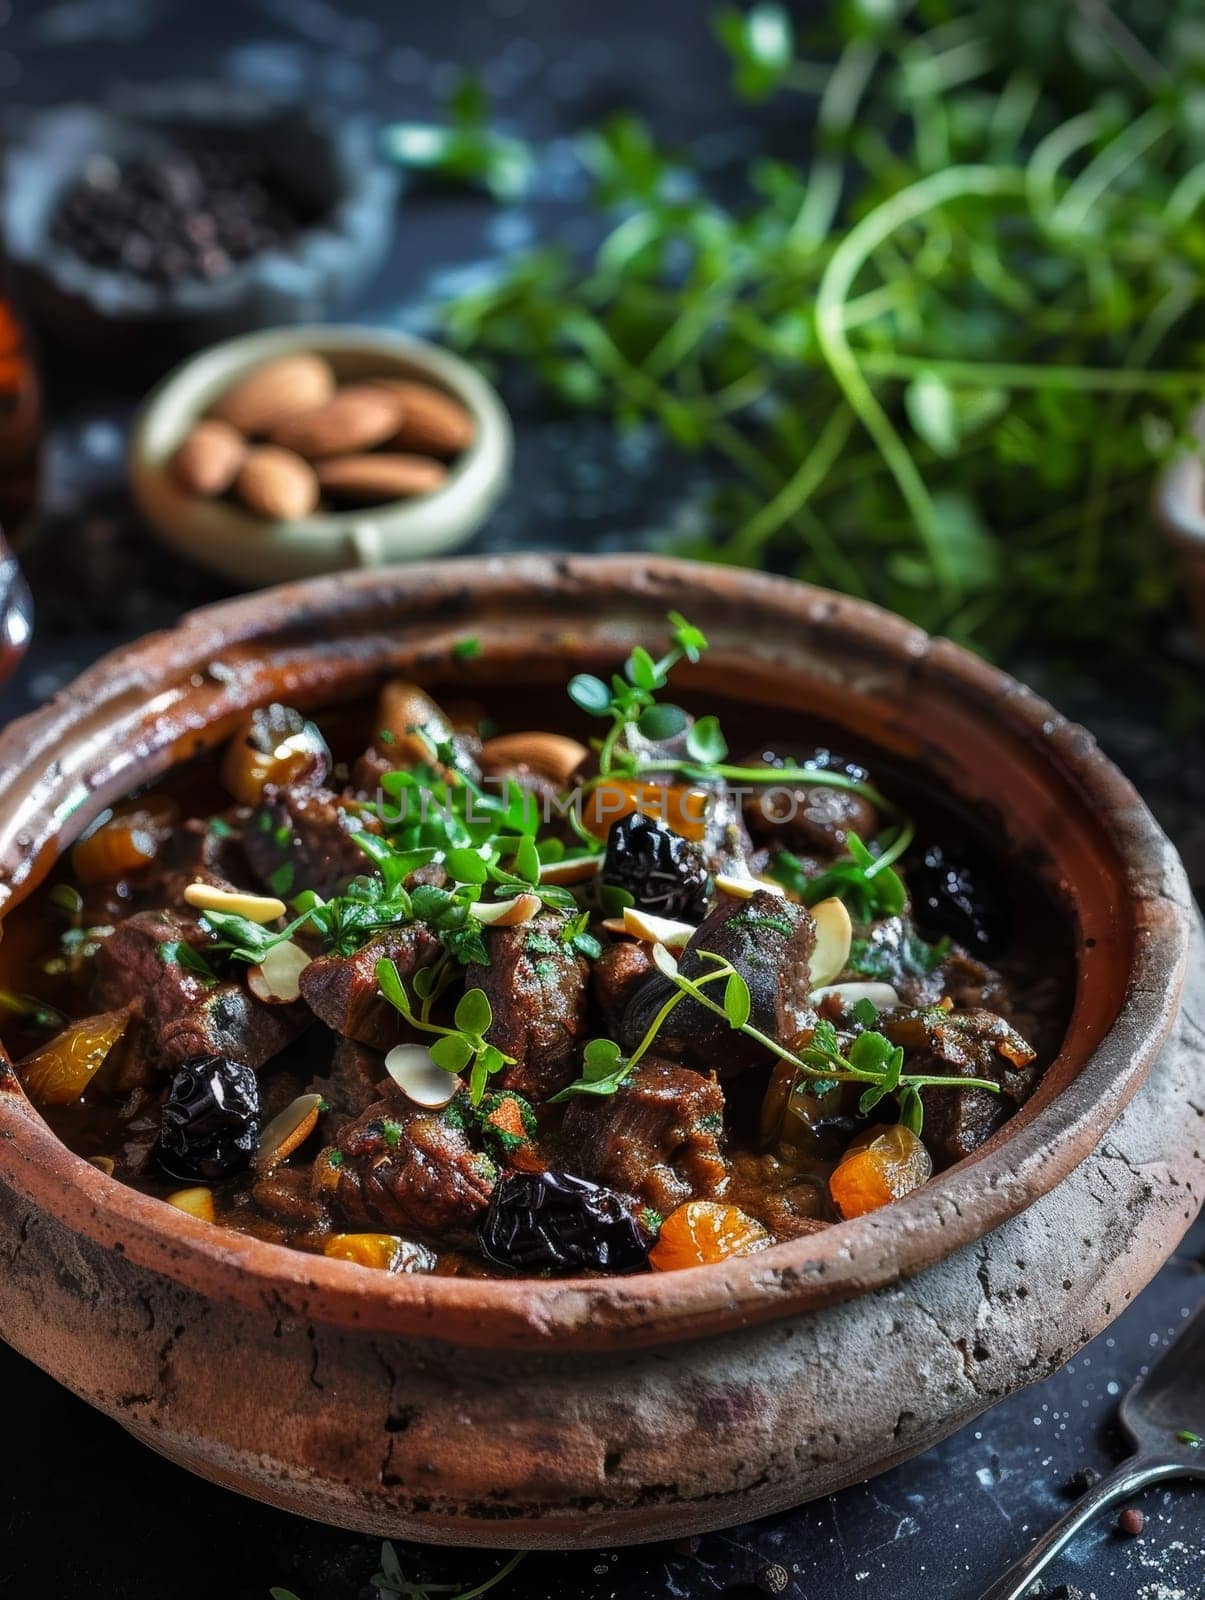 A traditional Moroccan tagine stew featuring tender lamb, sweet prunes, and crunchy almonds, slow-cooked to perfection in an authentic earthenware pot and garnished with fresh, fragrant herbs. by sfinks